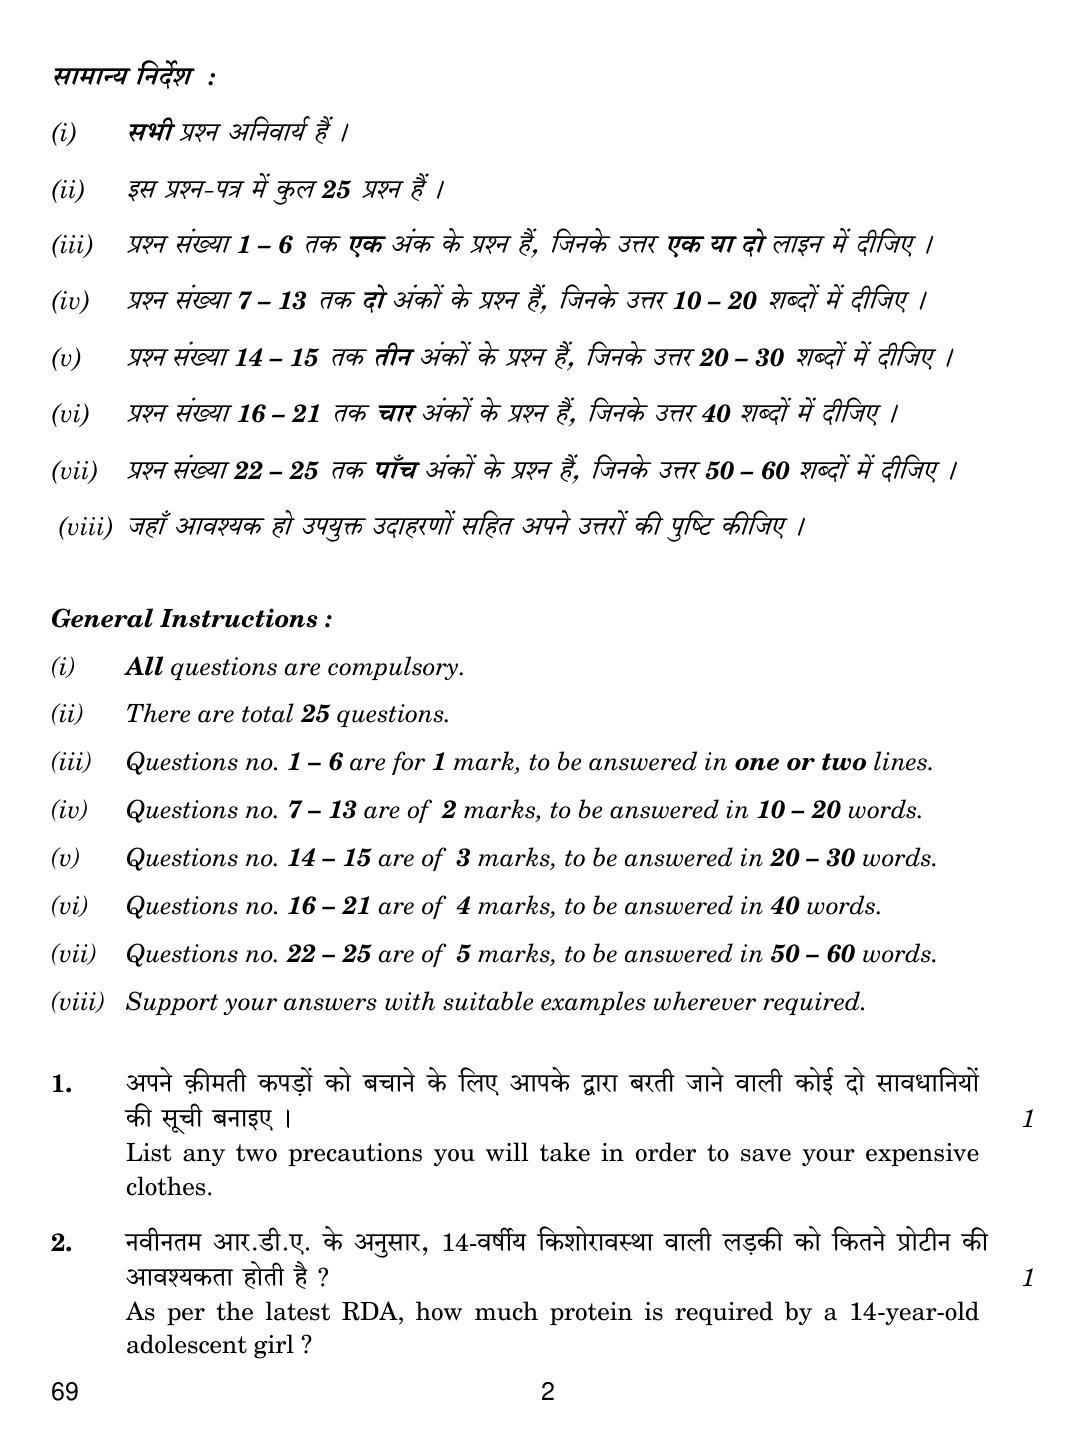 CBSE Class 12 69 HOME SCIENCE 2018 Question Paper - Page 2